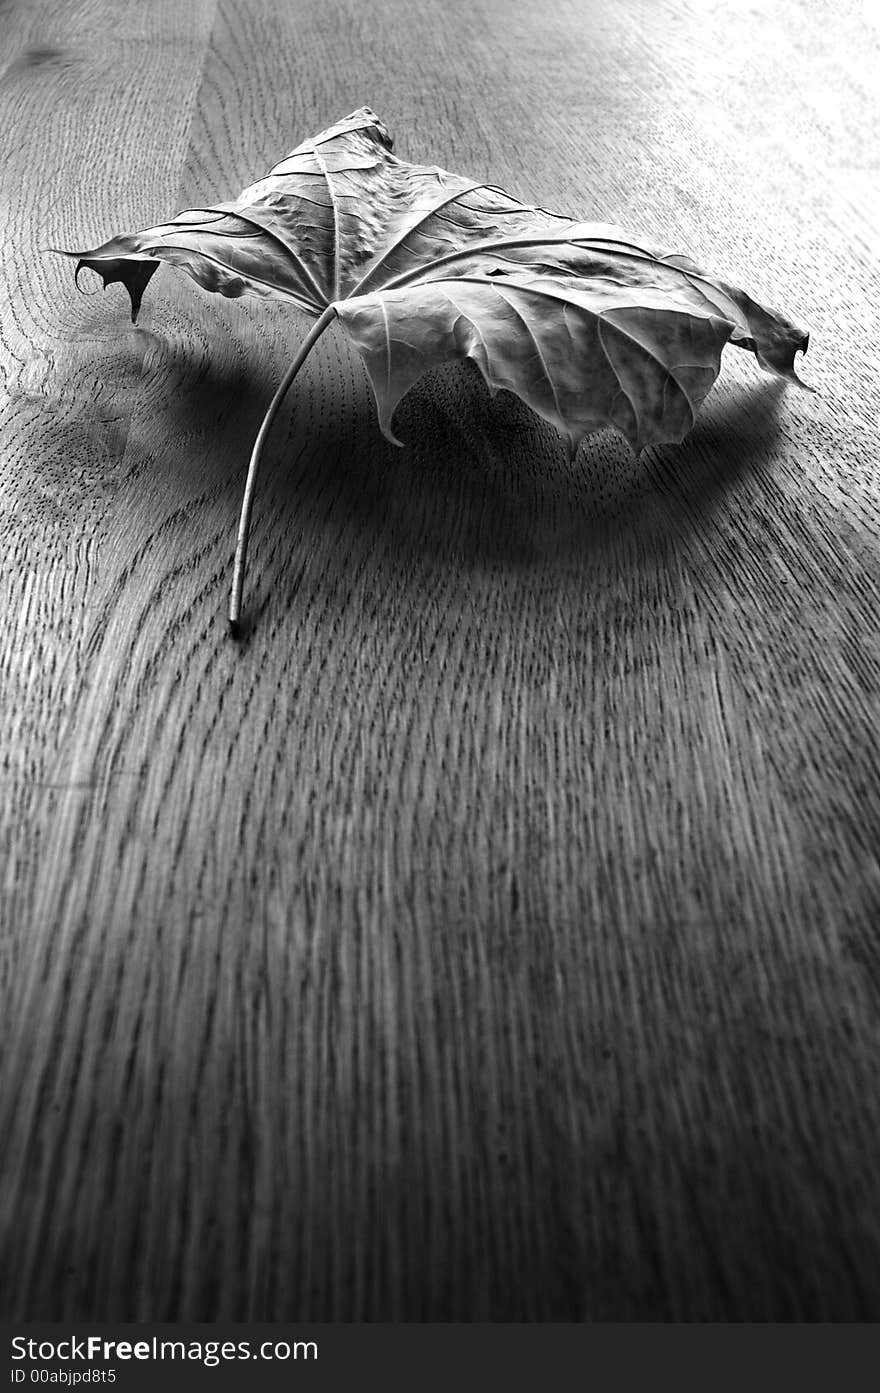 Dry Leaf on a table With well defined textures and grain rear natural light. Dry Leaf on a table With well defined textures and grain rear natural light